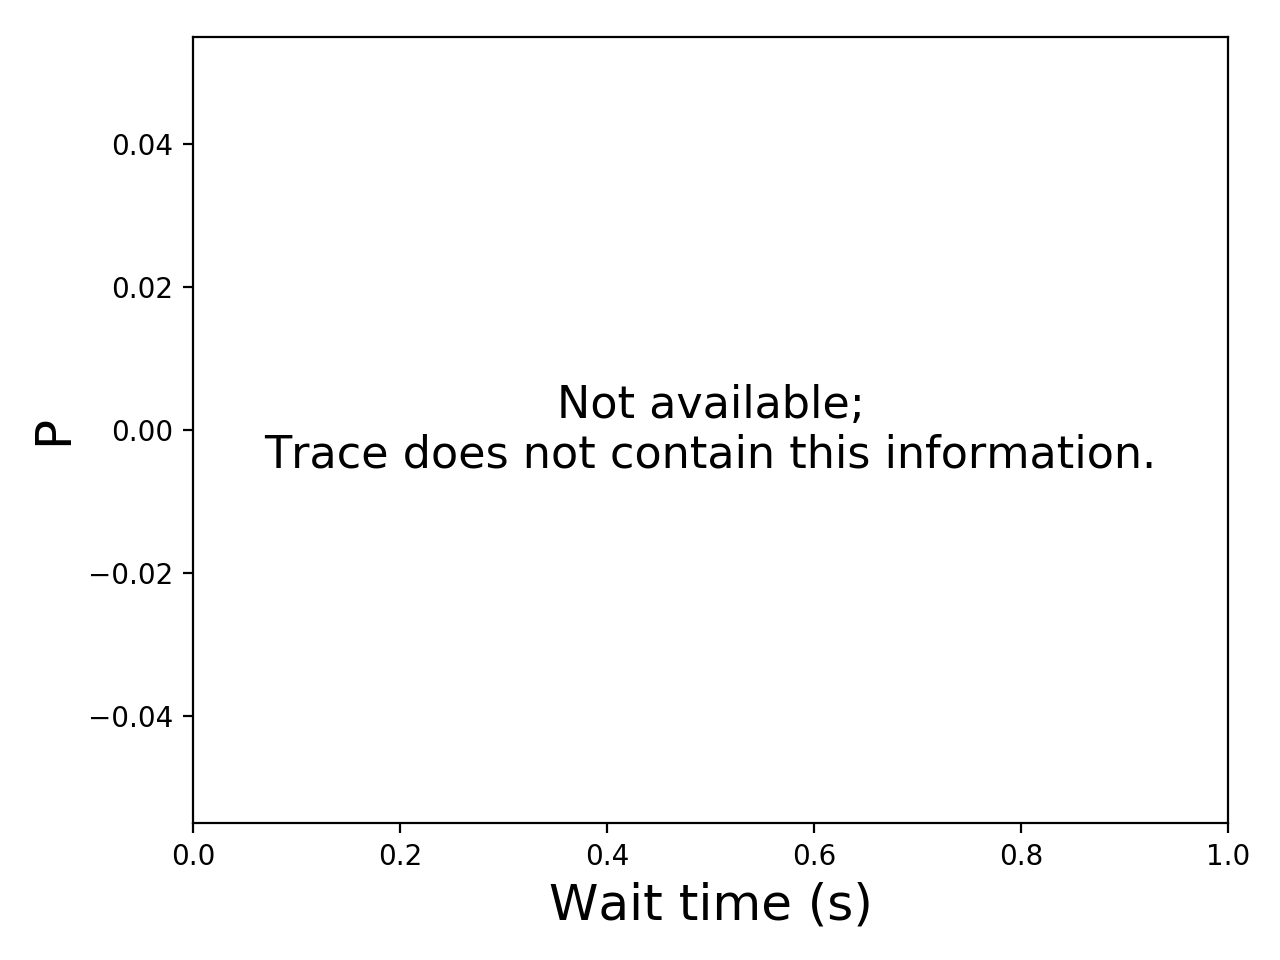 Task wait time CDF graph for the workflowhub_montage_ti01-971107n_degree-2-0_osg_schema-0-2_montage-2-0-osg-run007 trace.